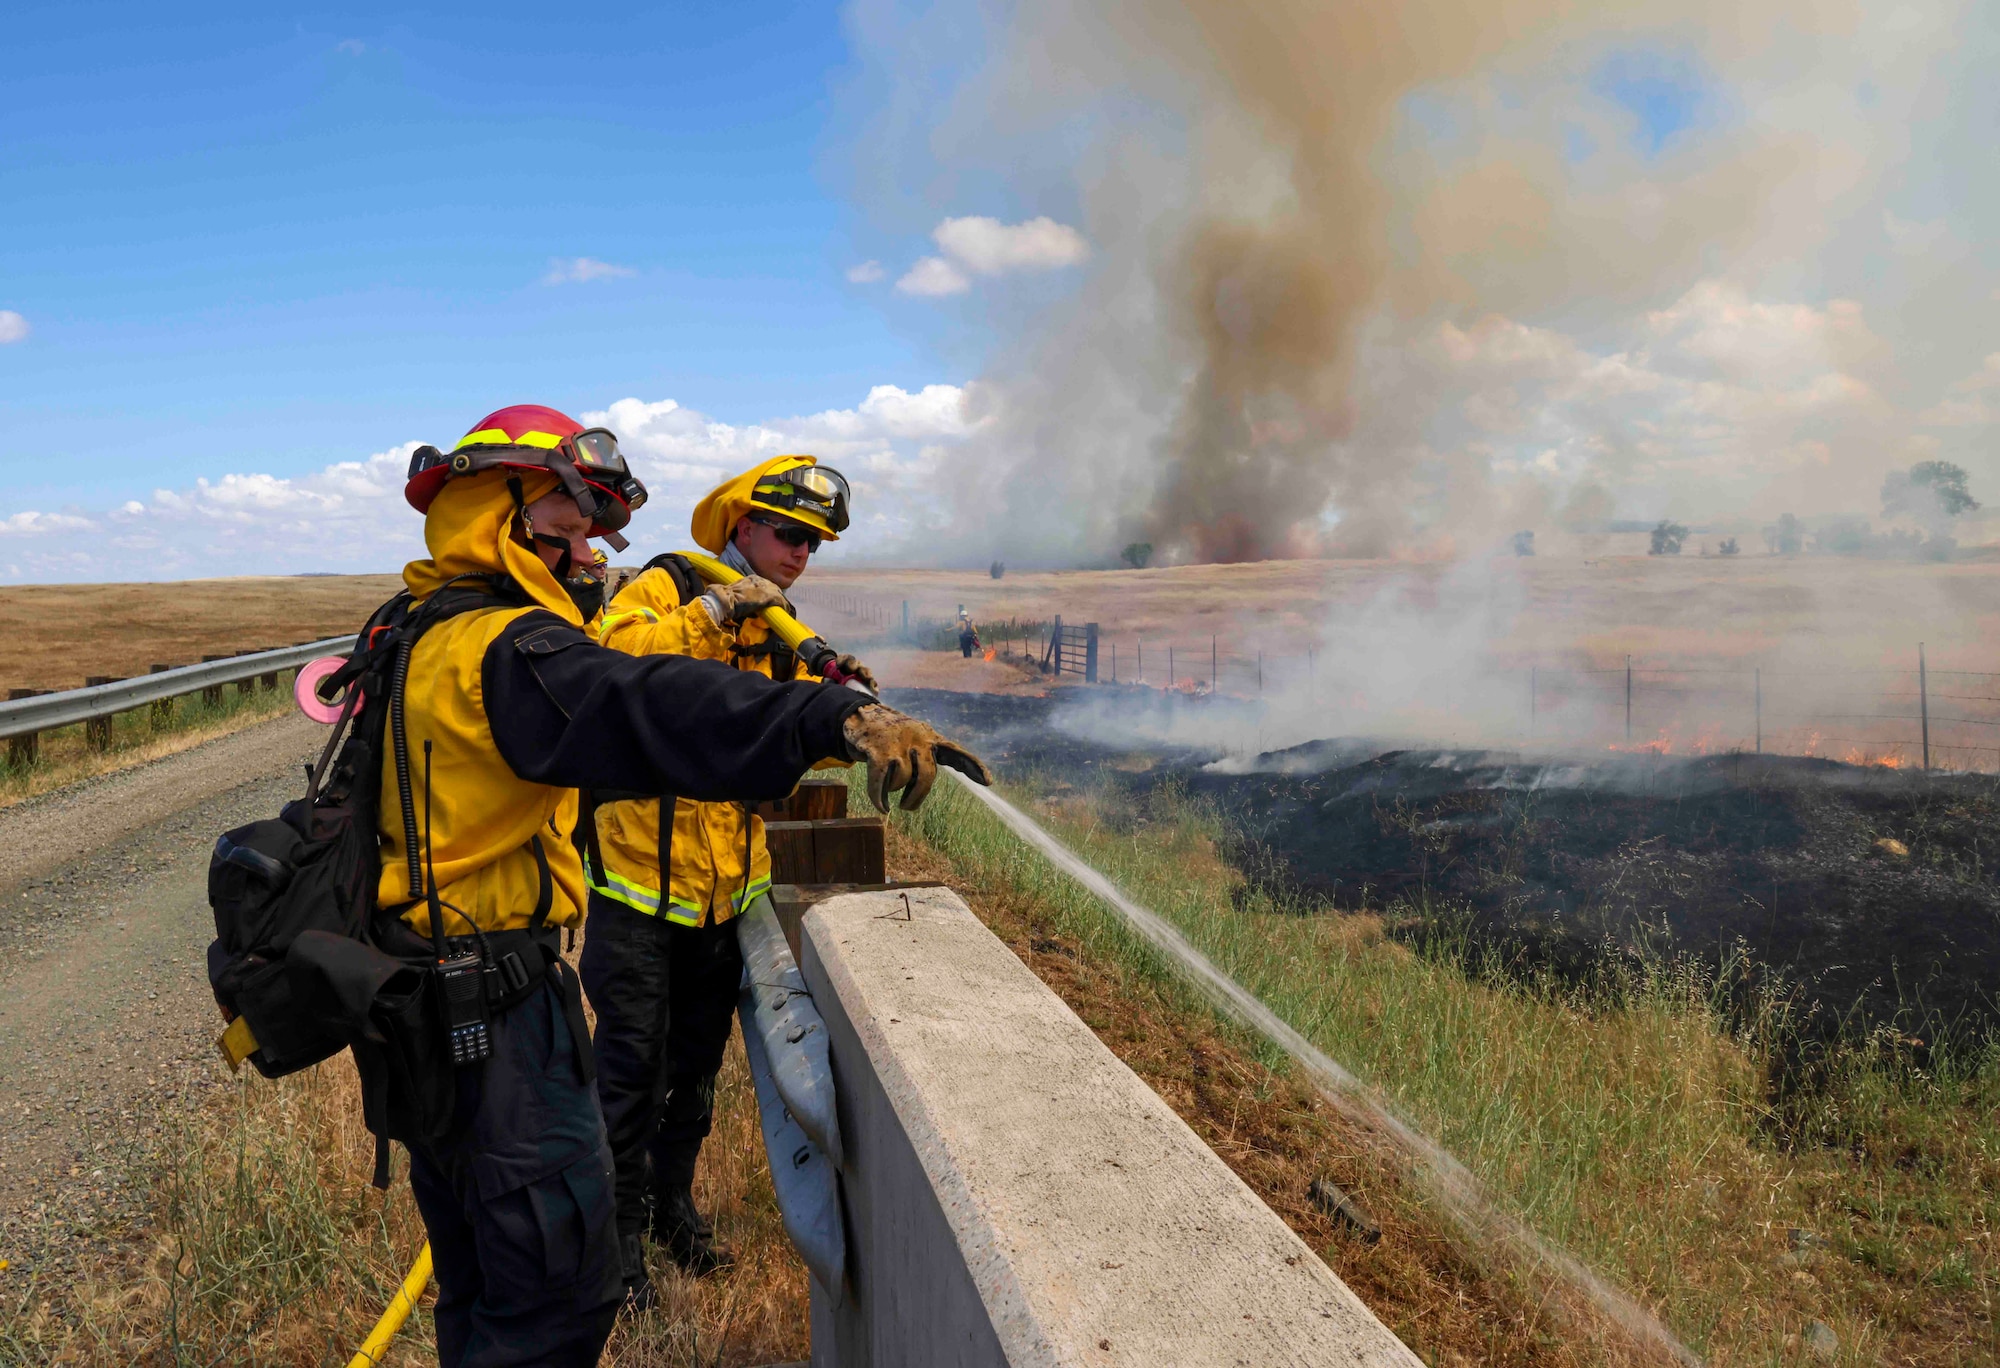 Crew members of the Air Force Civil Engineer Center Wildland Fire Support Module conduct a prescribed fire, also known as a controlled burn, on June 6th, 2022 at Beale Air Force Base, Calif.